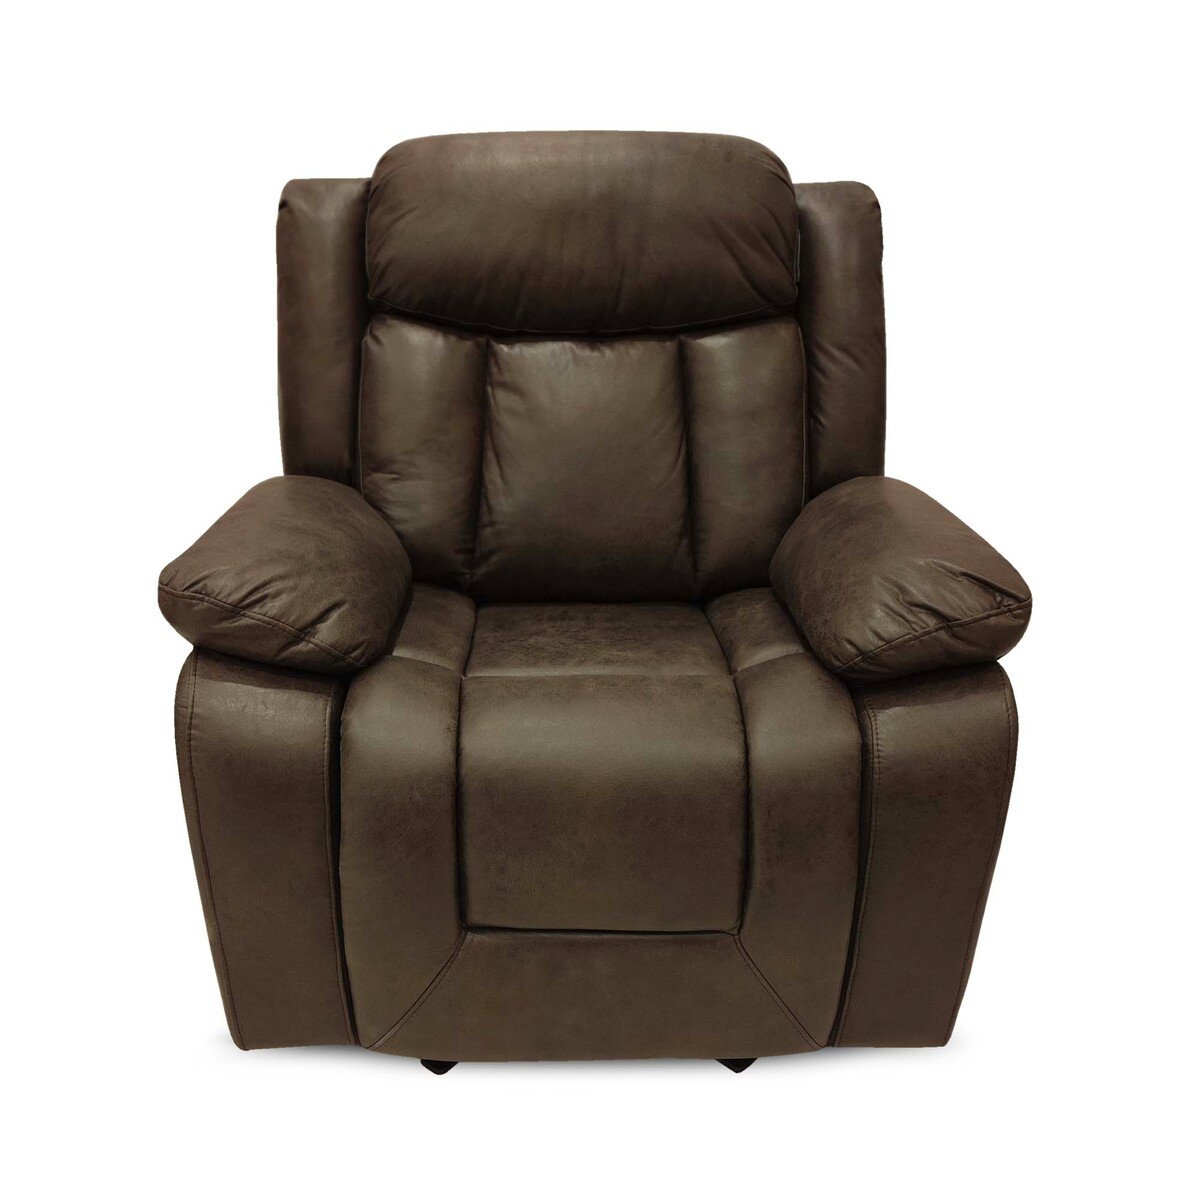 Maple Leaf  Recliner Chair Brown 11959R Size:Cms 100x170x100 Cms(HxWxL) (Made In China)